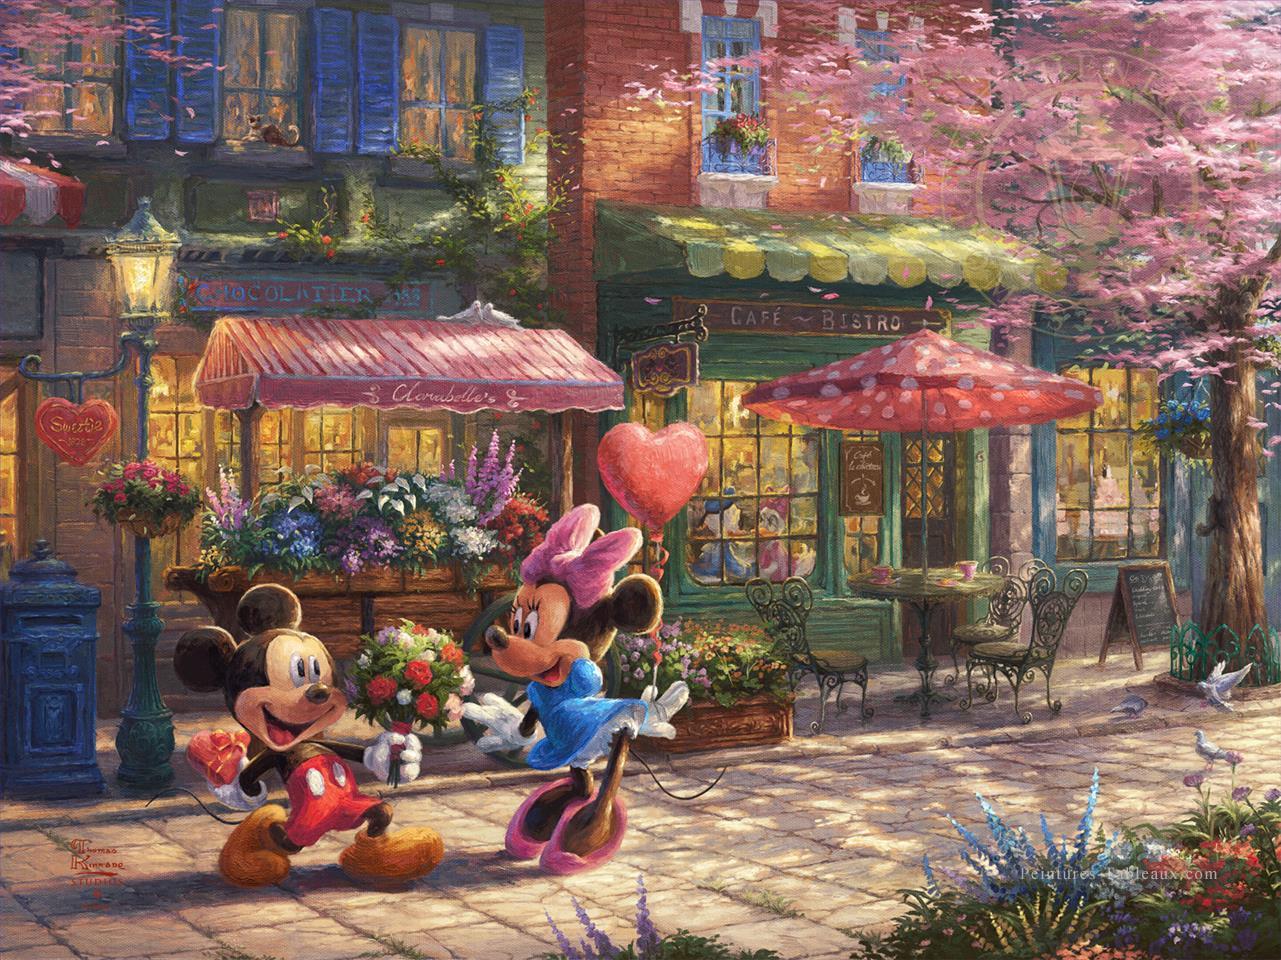 Mickey and Minnie Sweetheart Cafe TK Disney Peintures à l'huile